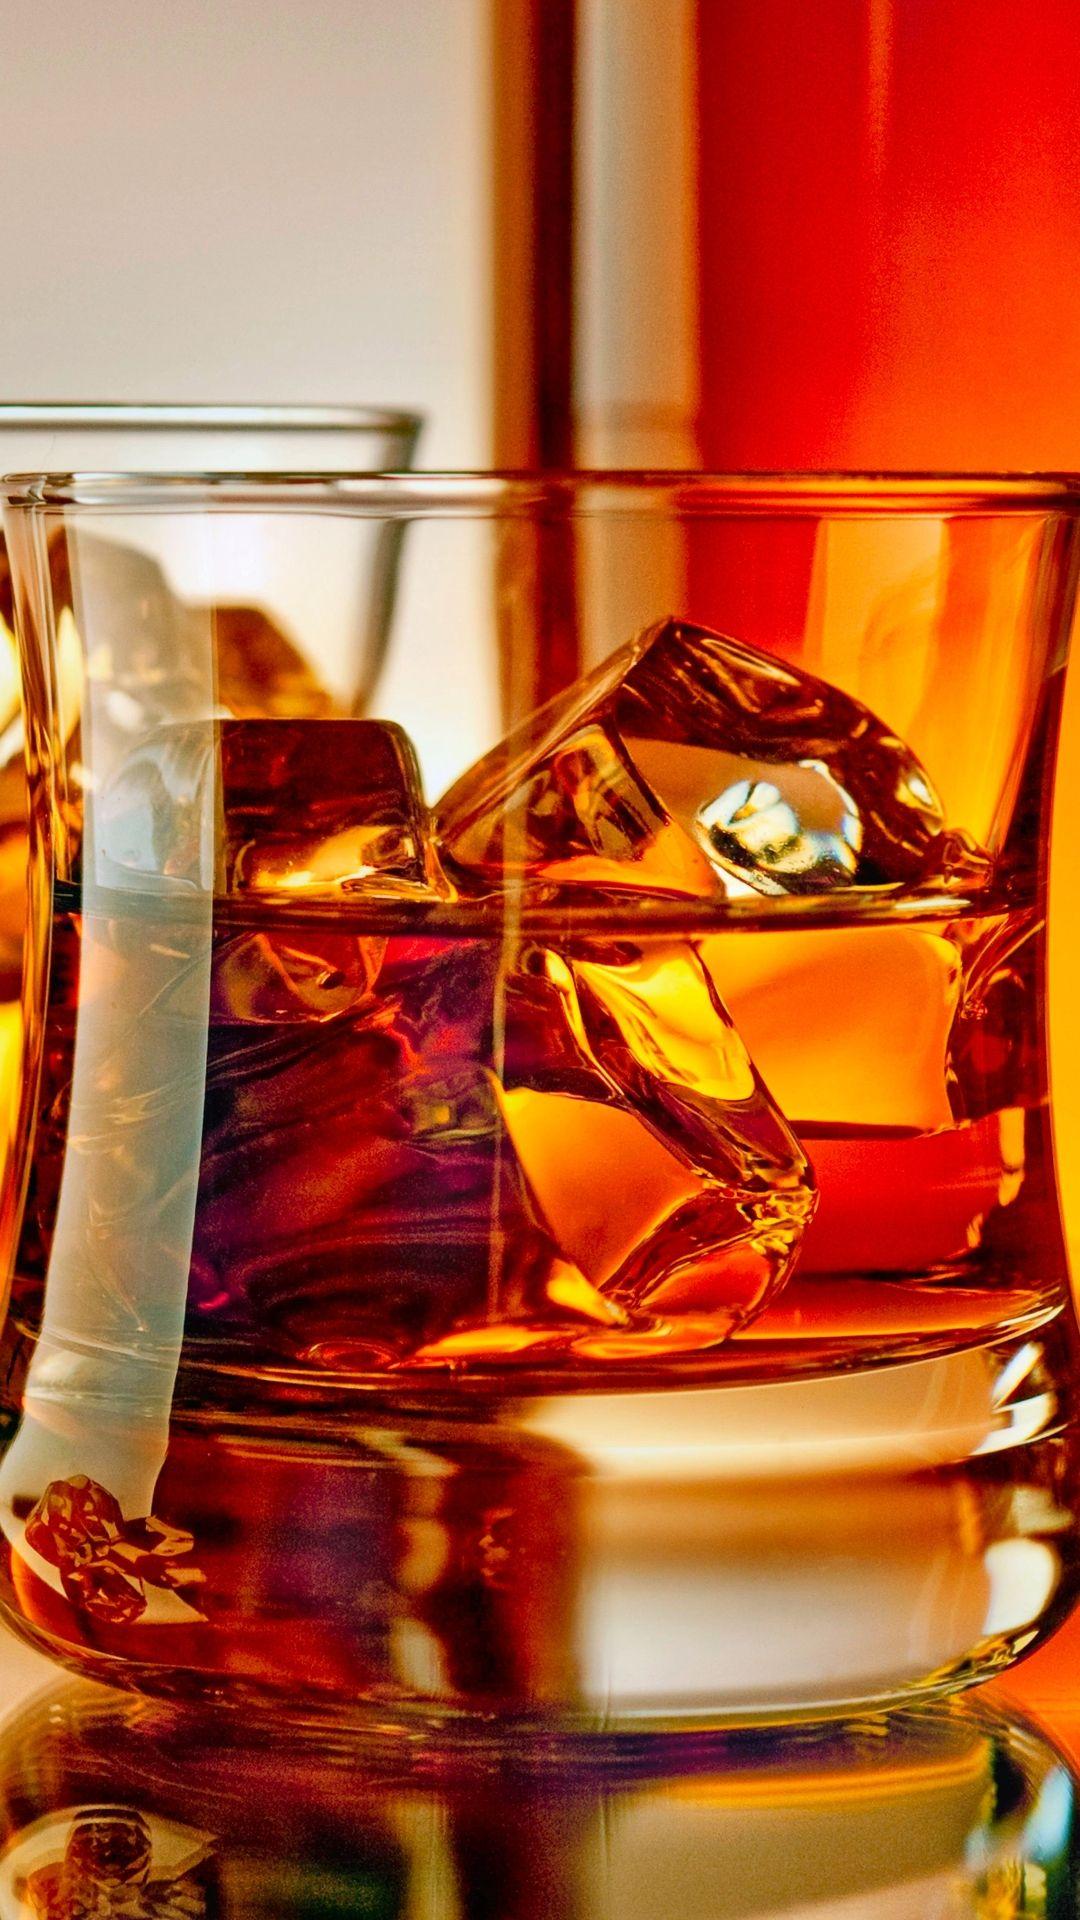 Whisky glass Stock Photos, Royalty Free Whisky glass Images | Depositphotos